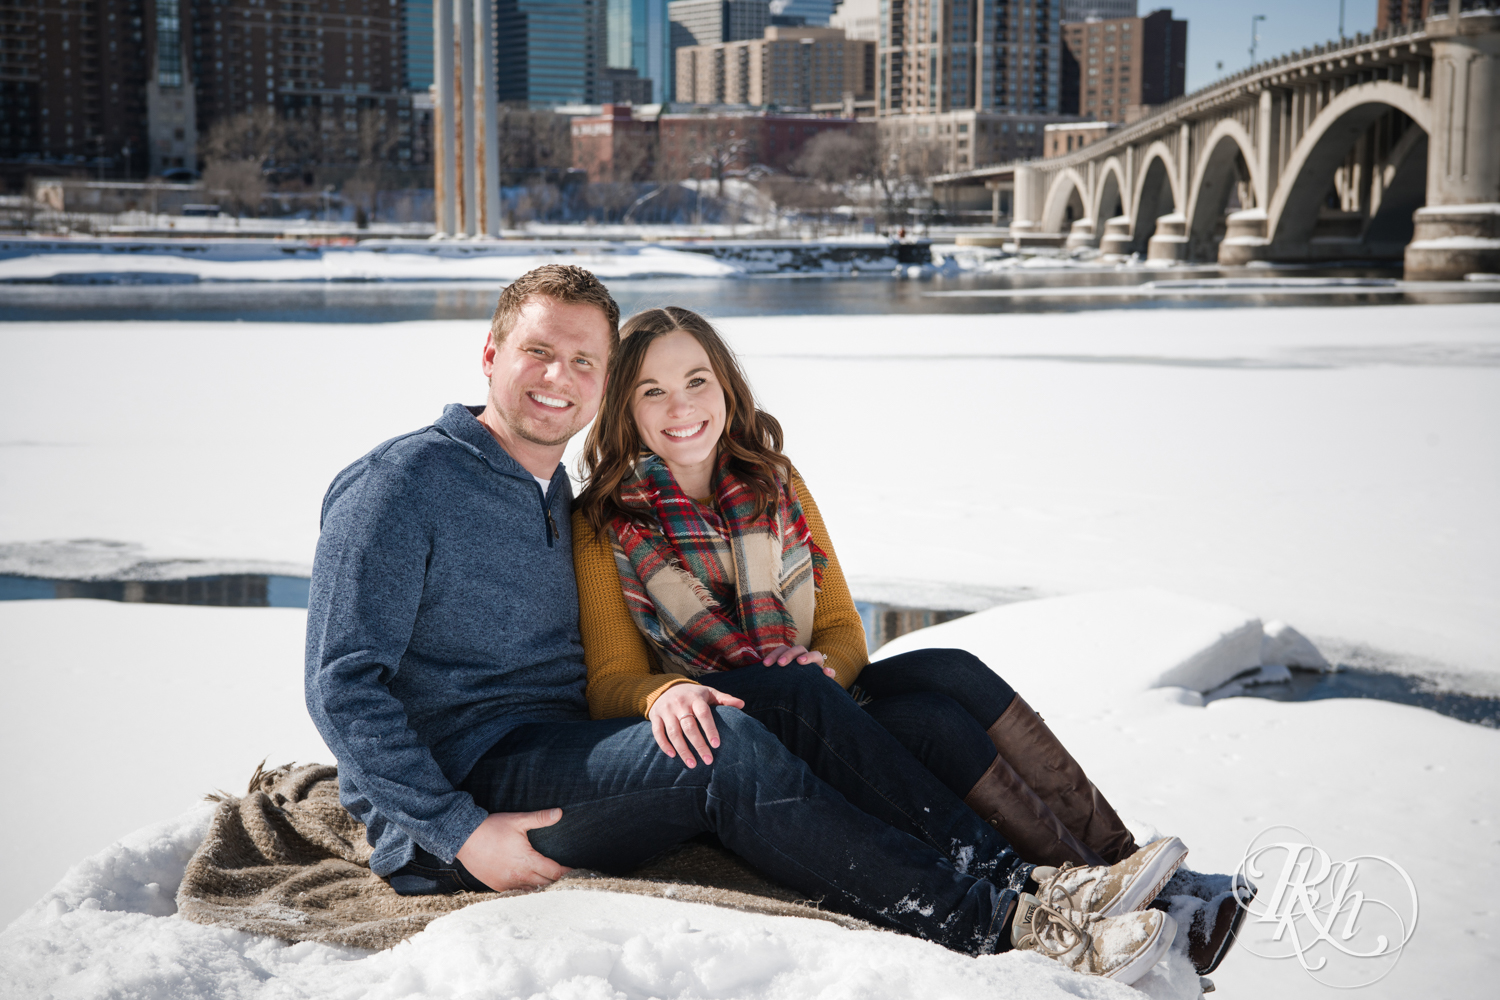 Man and woman smile during winter engagement photography in Minneapolis, Minnesota.